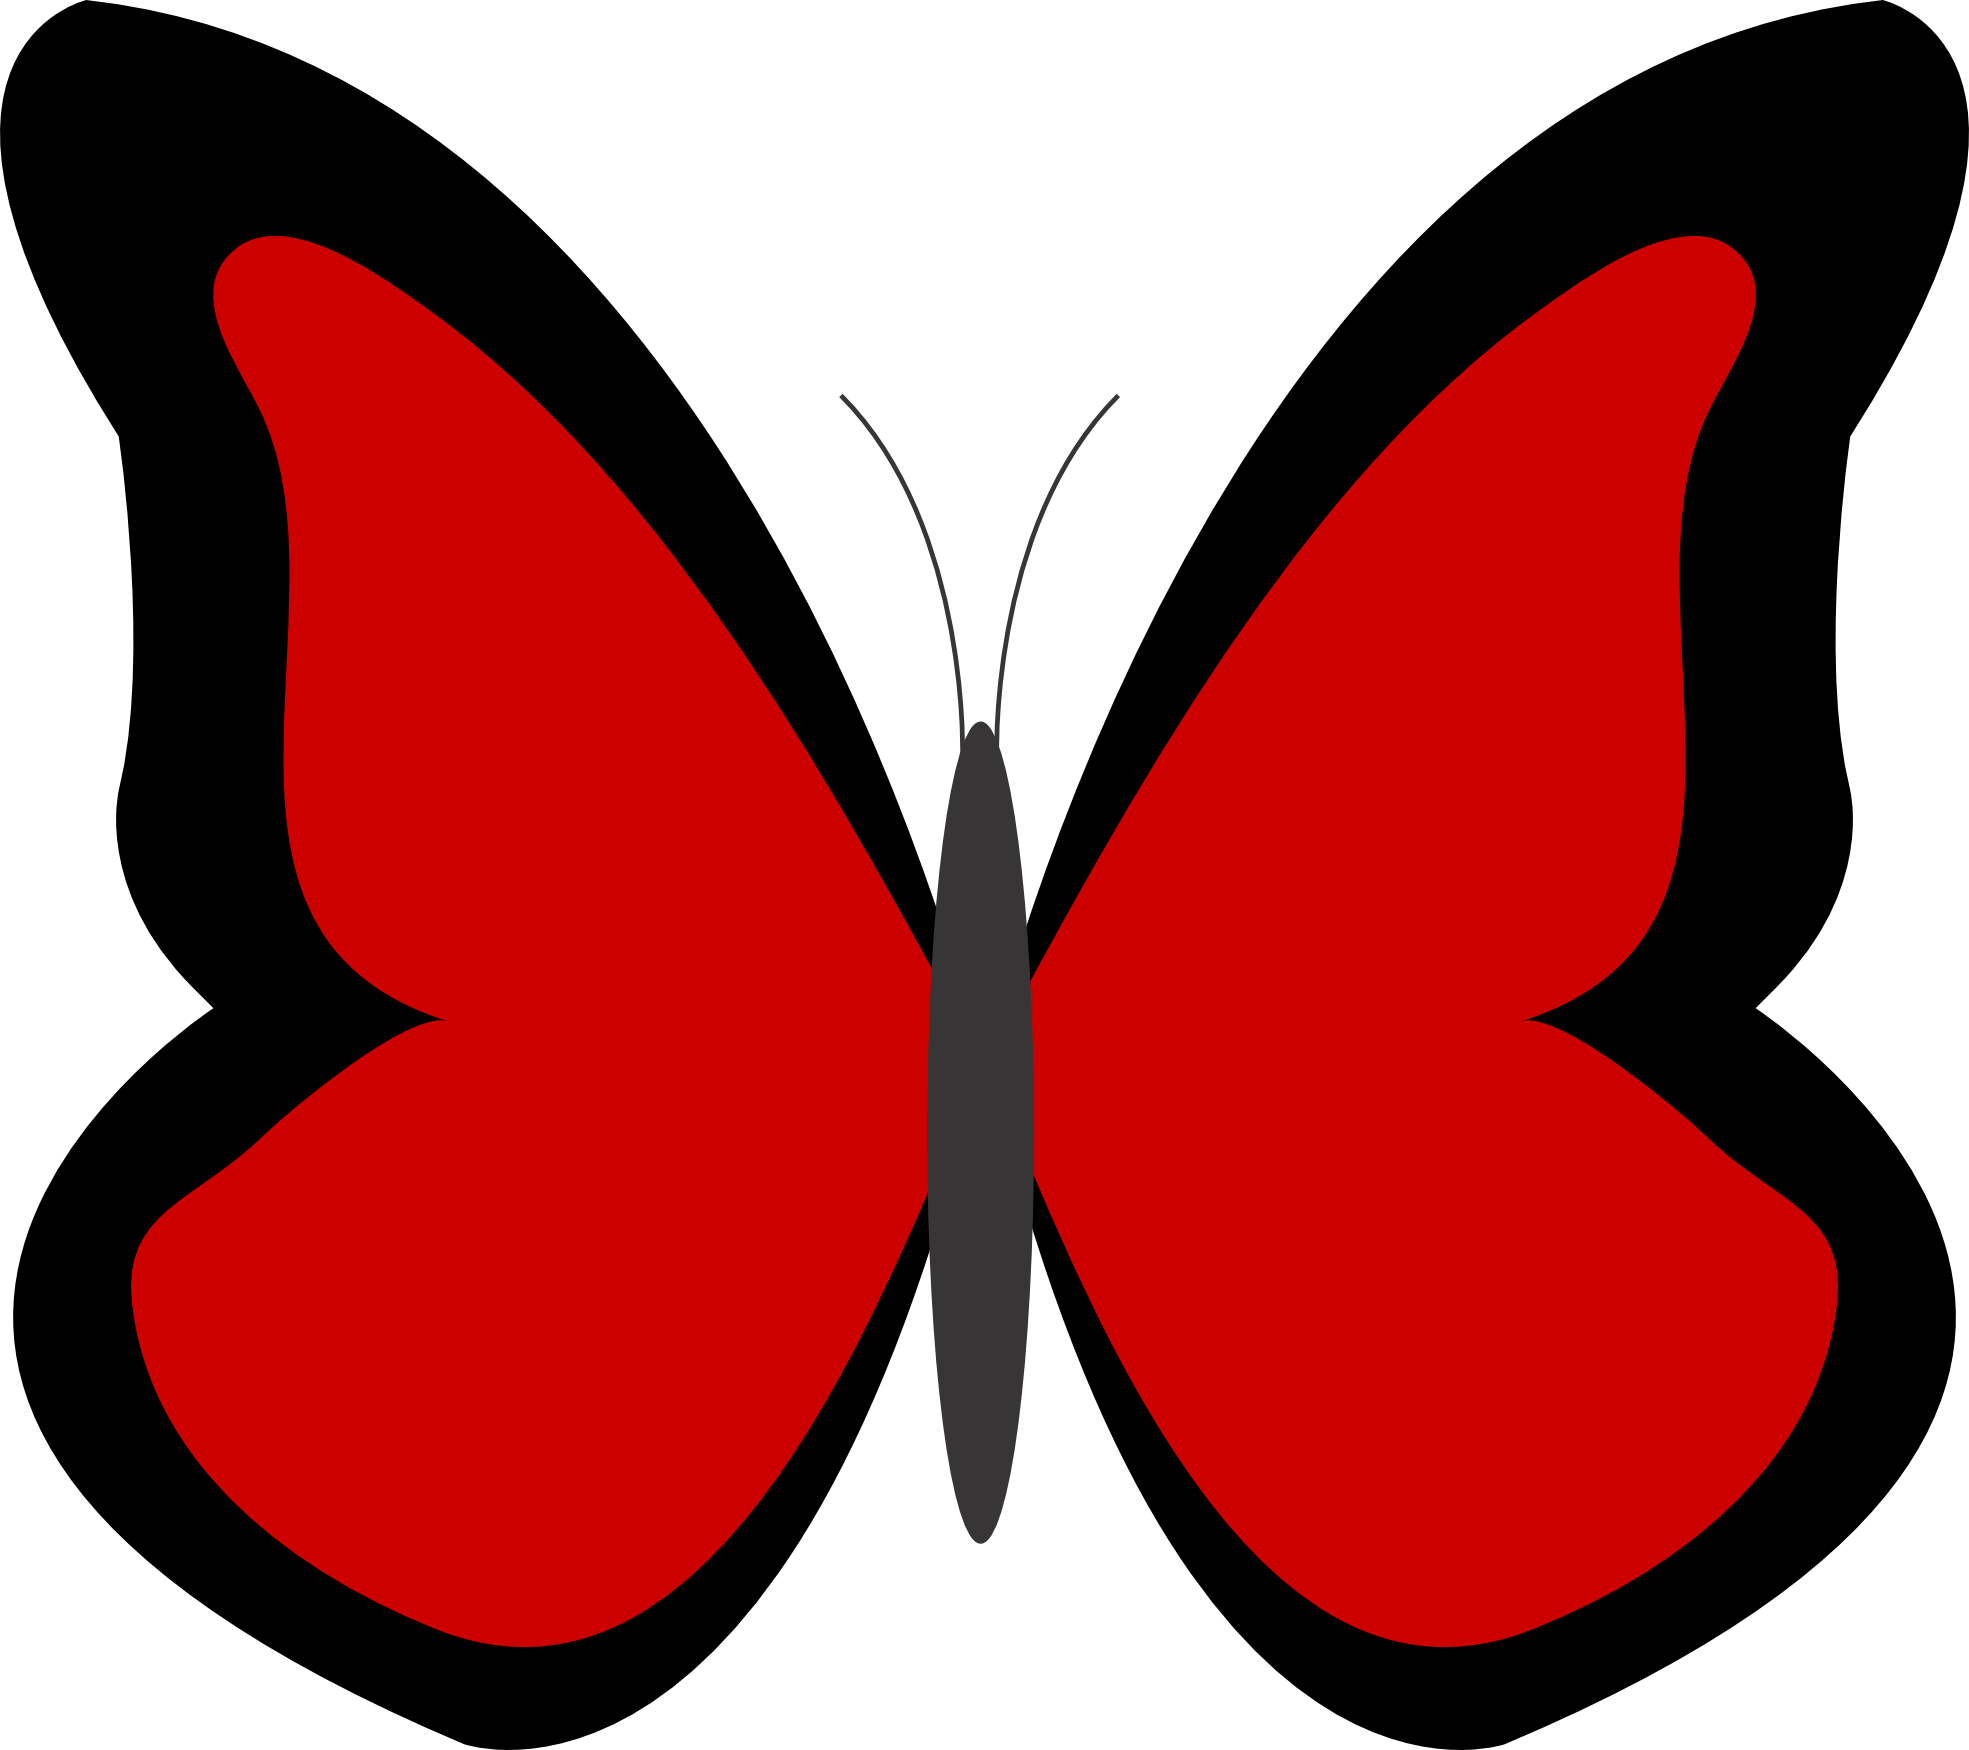 Free Butterfly Border Clipart, Download Free Clip Art, Free